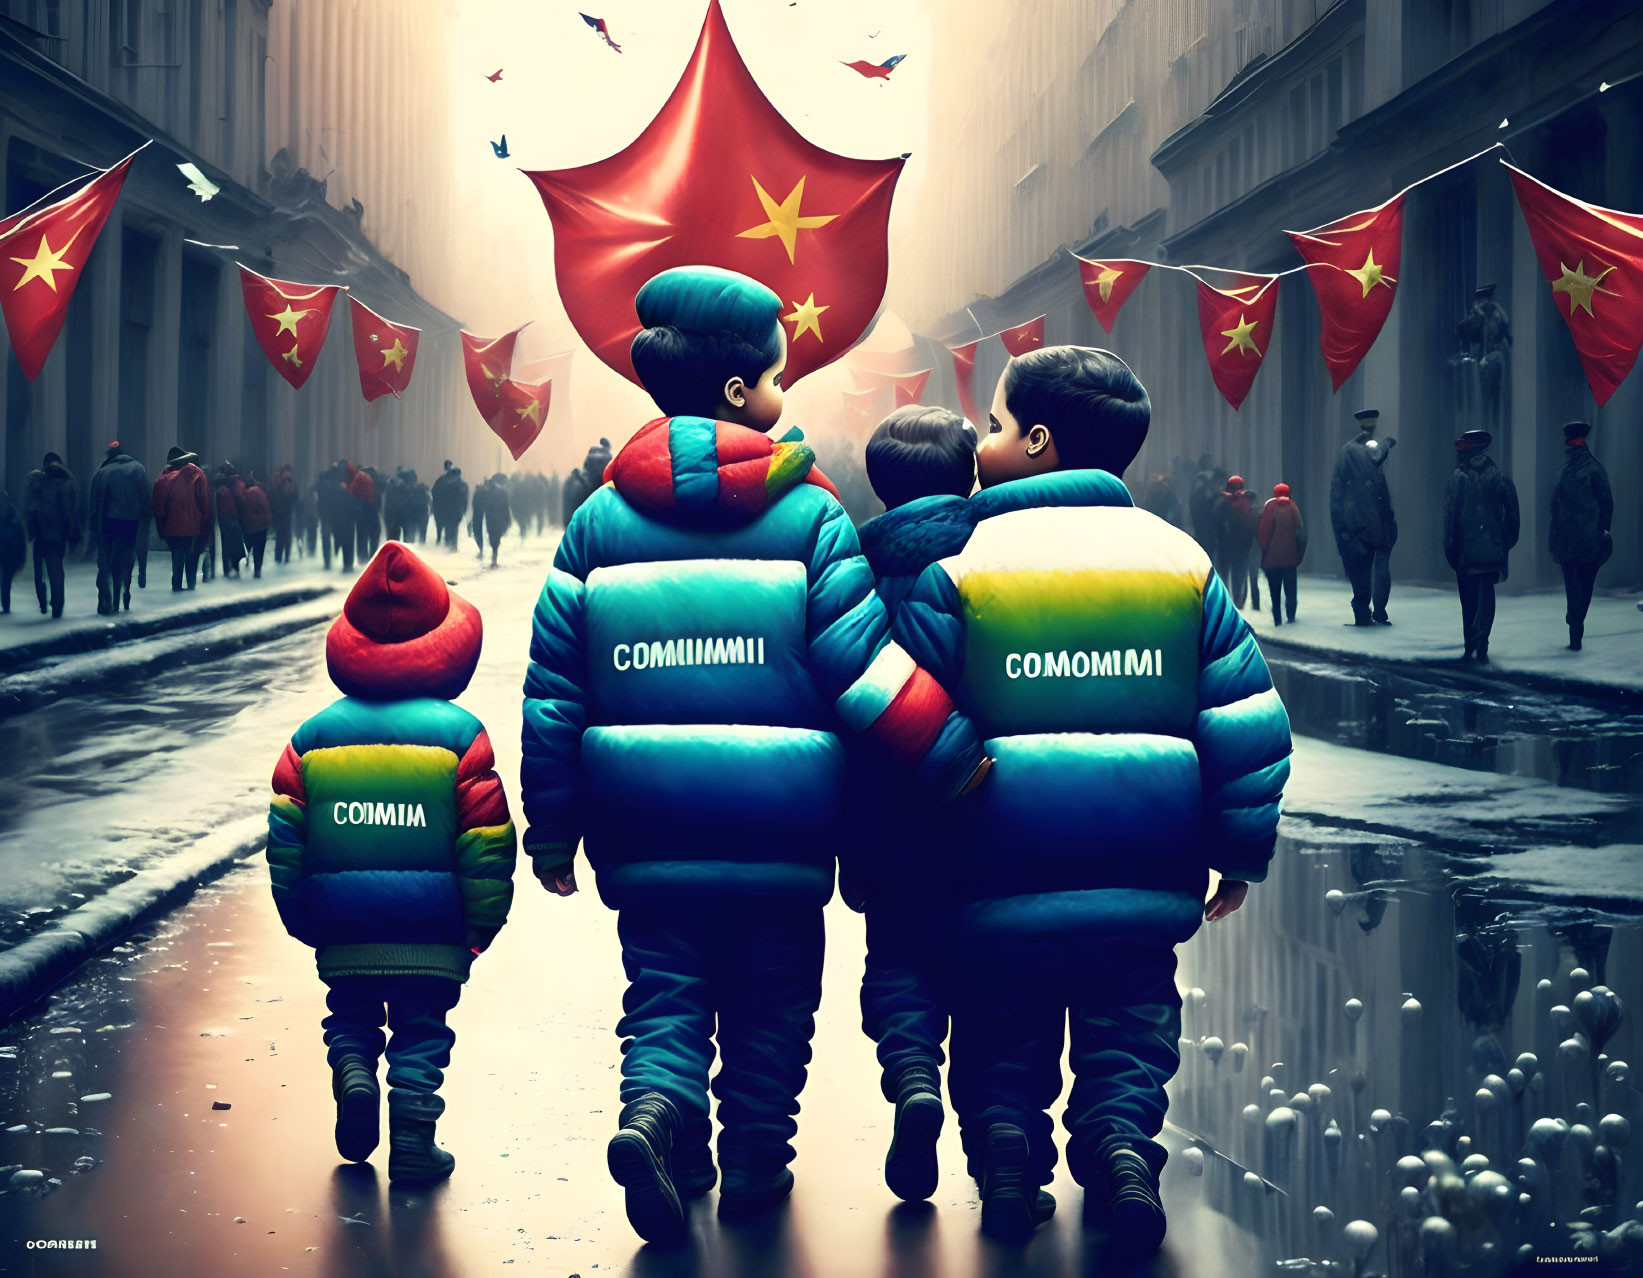 Children in "COMOMIMI" jackets walk past red flags in grayscale cityscape